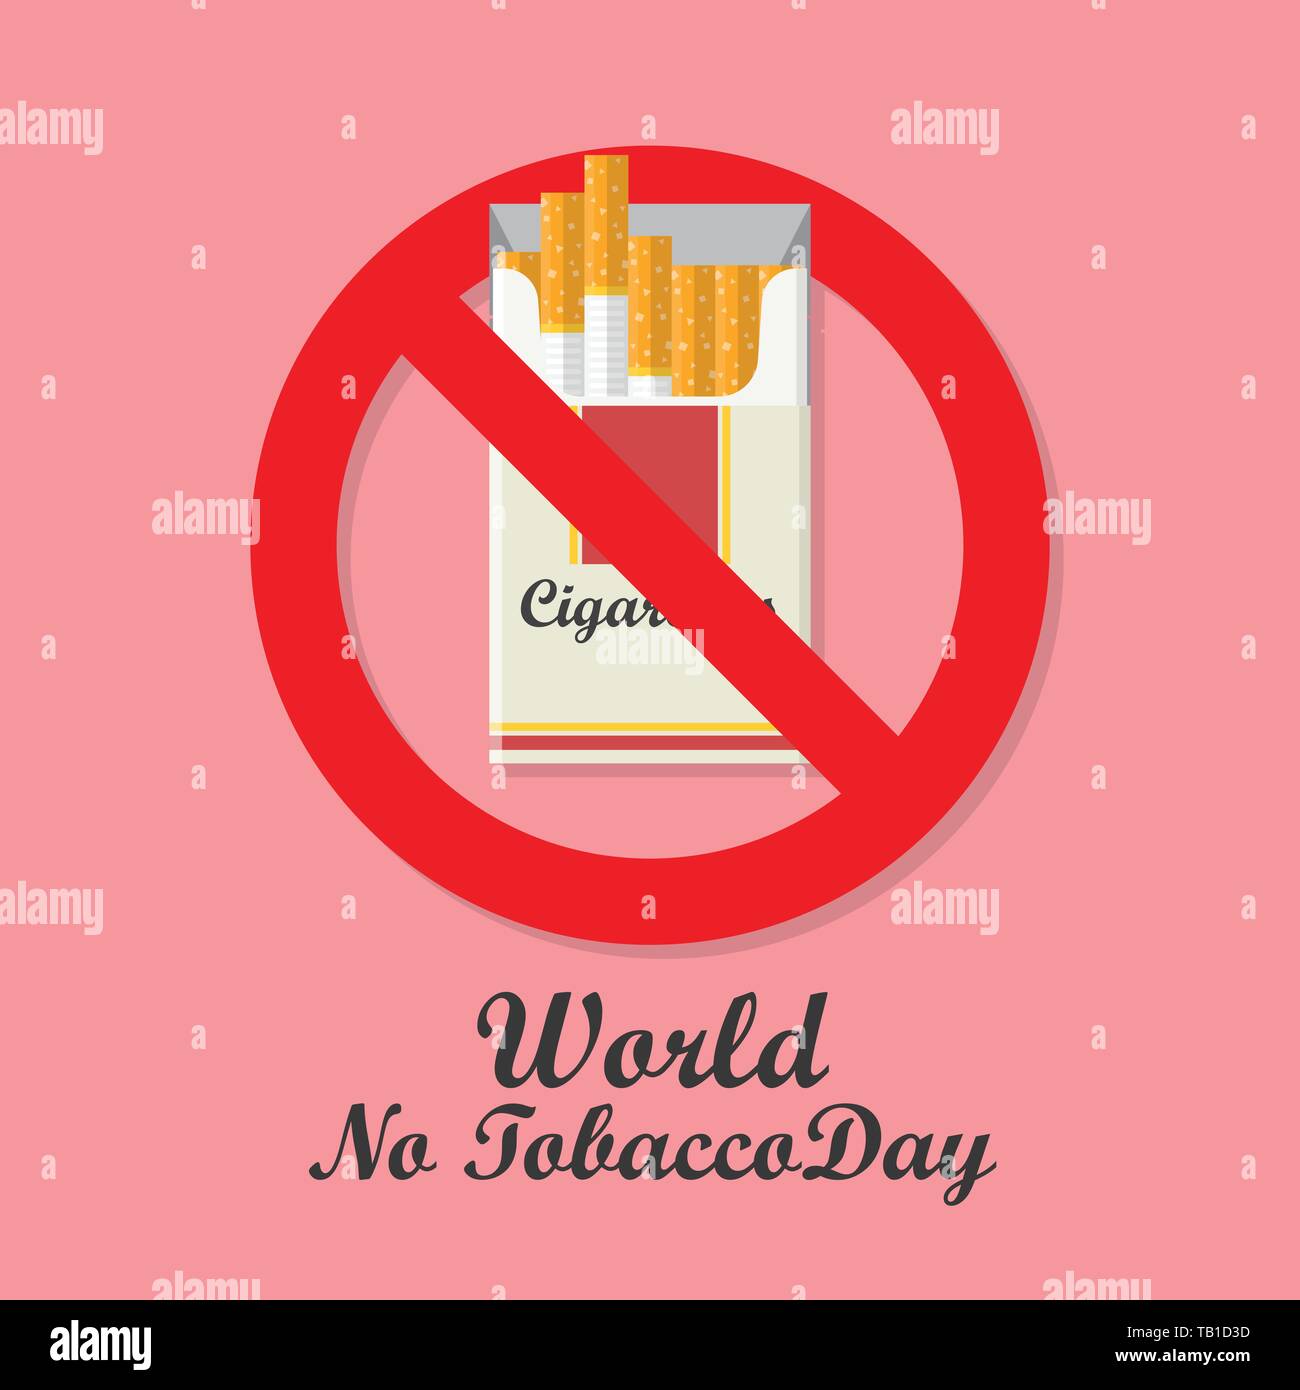 World No Tobacco Day with Cigarettes pack prohibition sign. Vector illustration Stock Vector